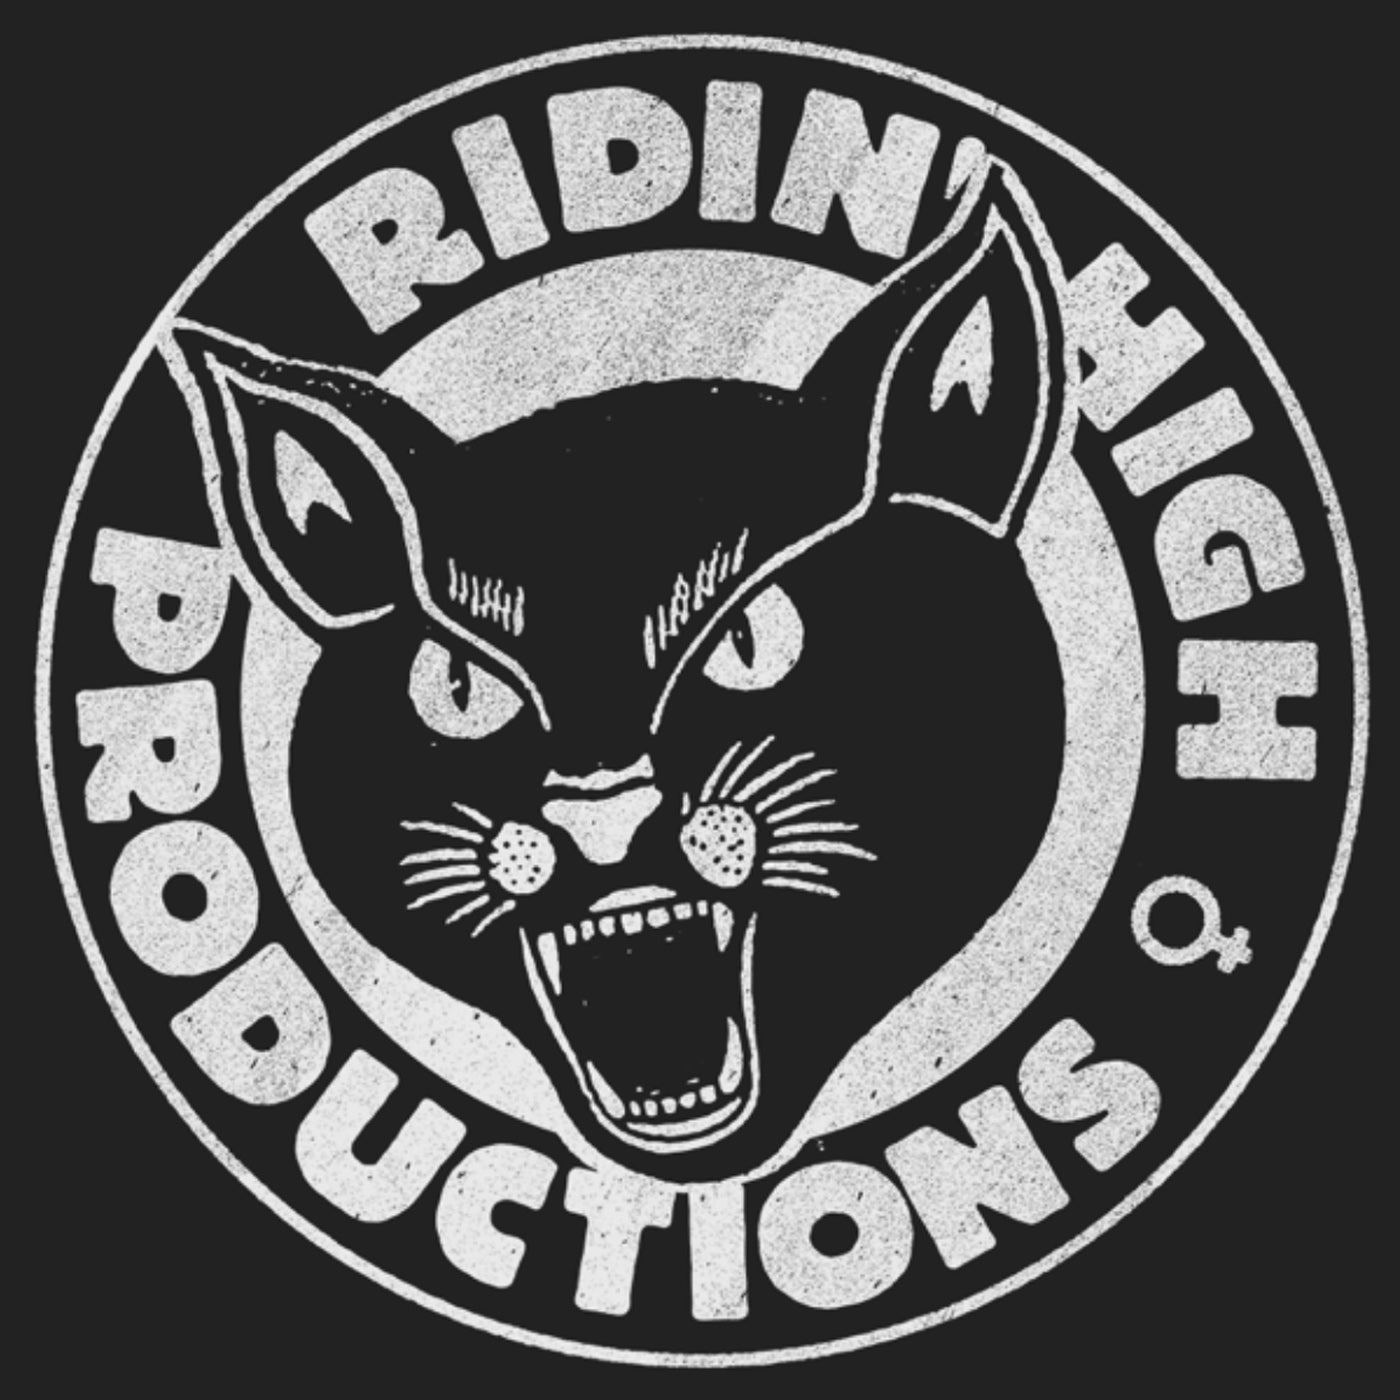 Ridin' High Productions Panther Logo Tee